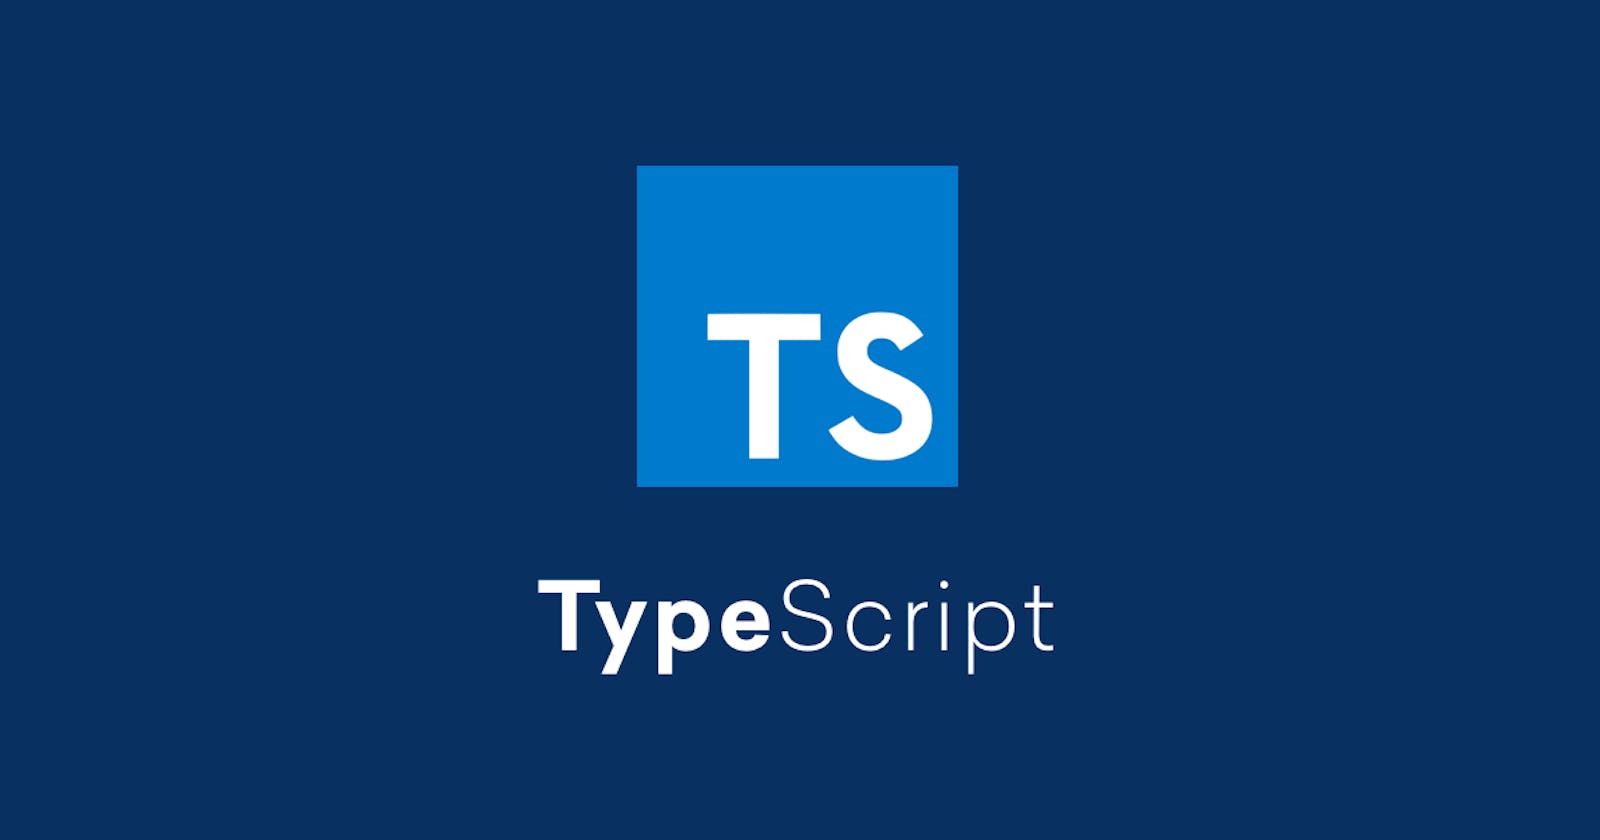 The easiest way to install Typescript in any Javascript project